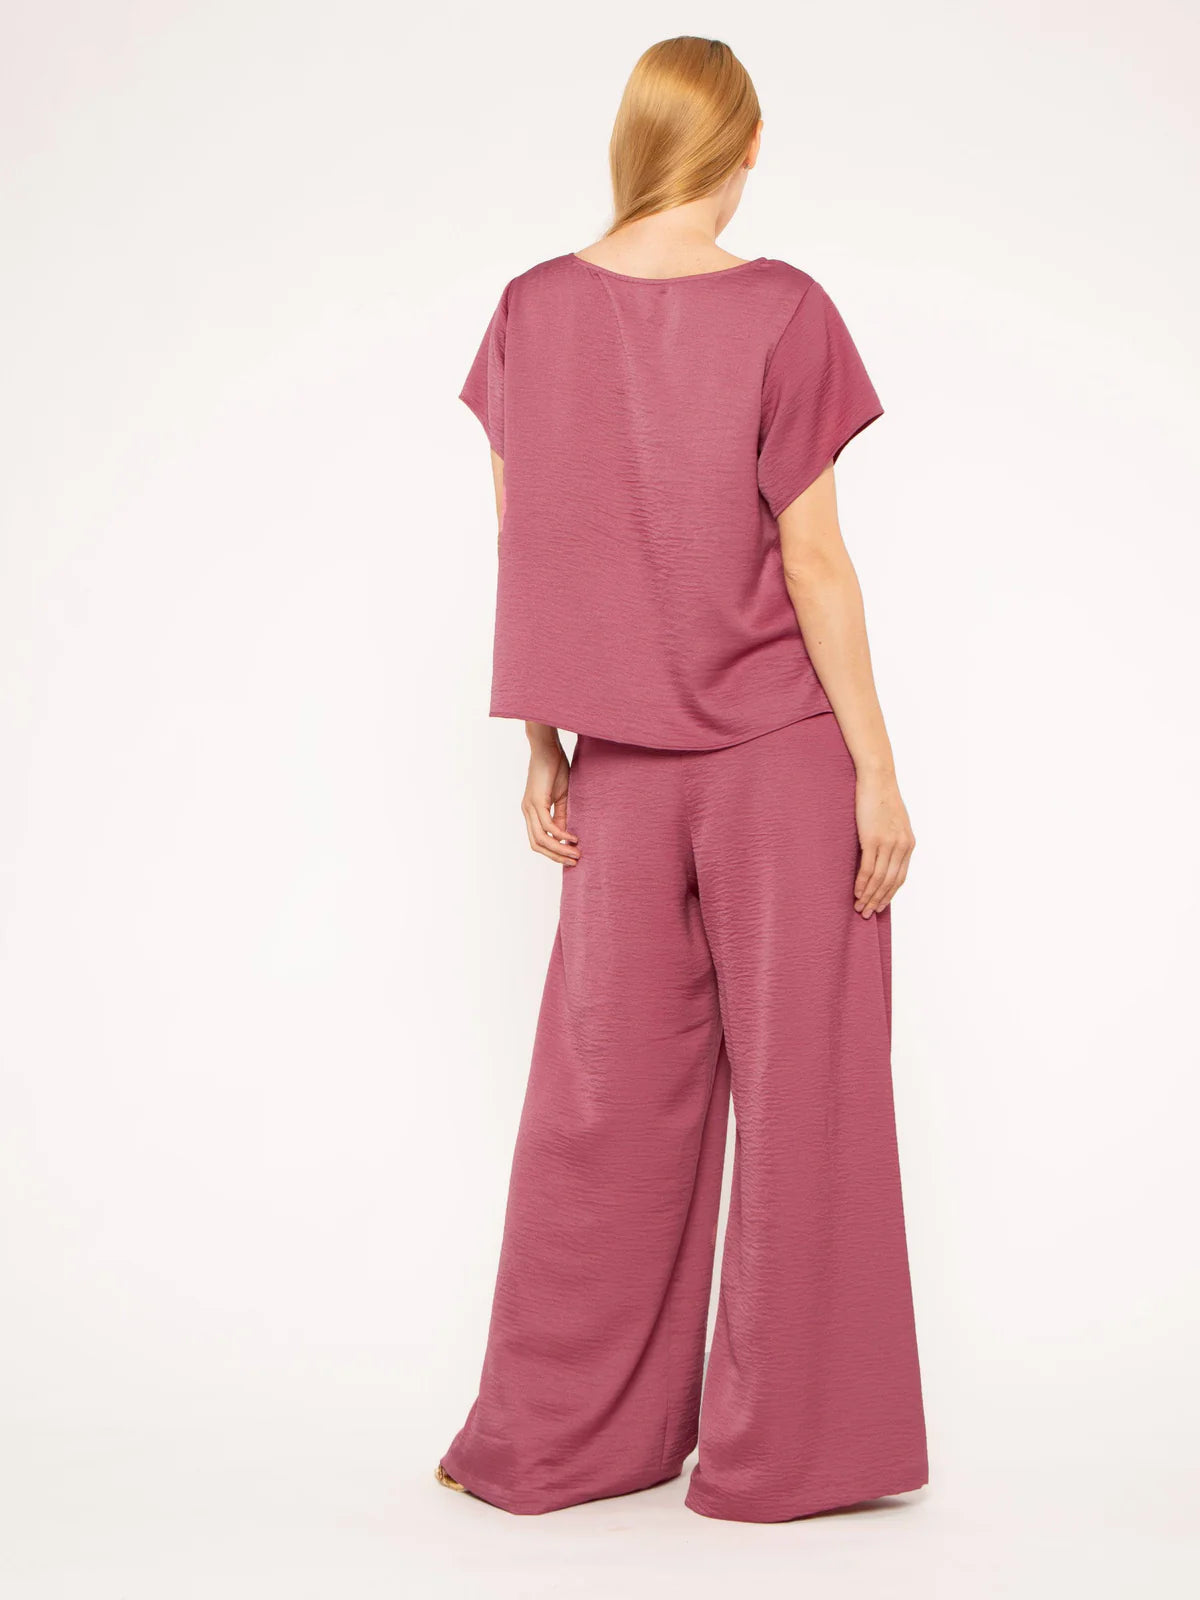 Ripley Rader - Mulberry Satin Crepe Yacht Pant - Council Studio